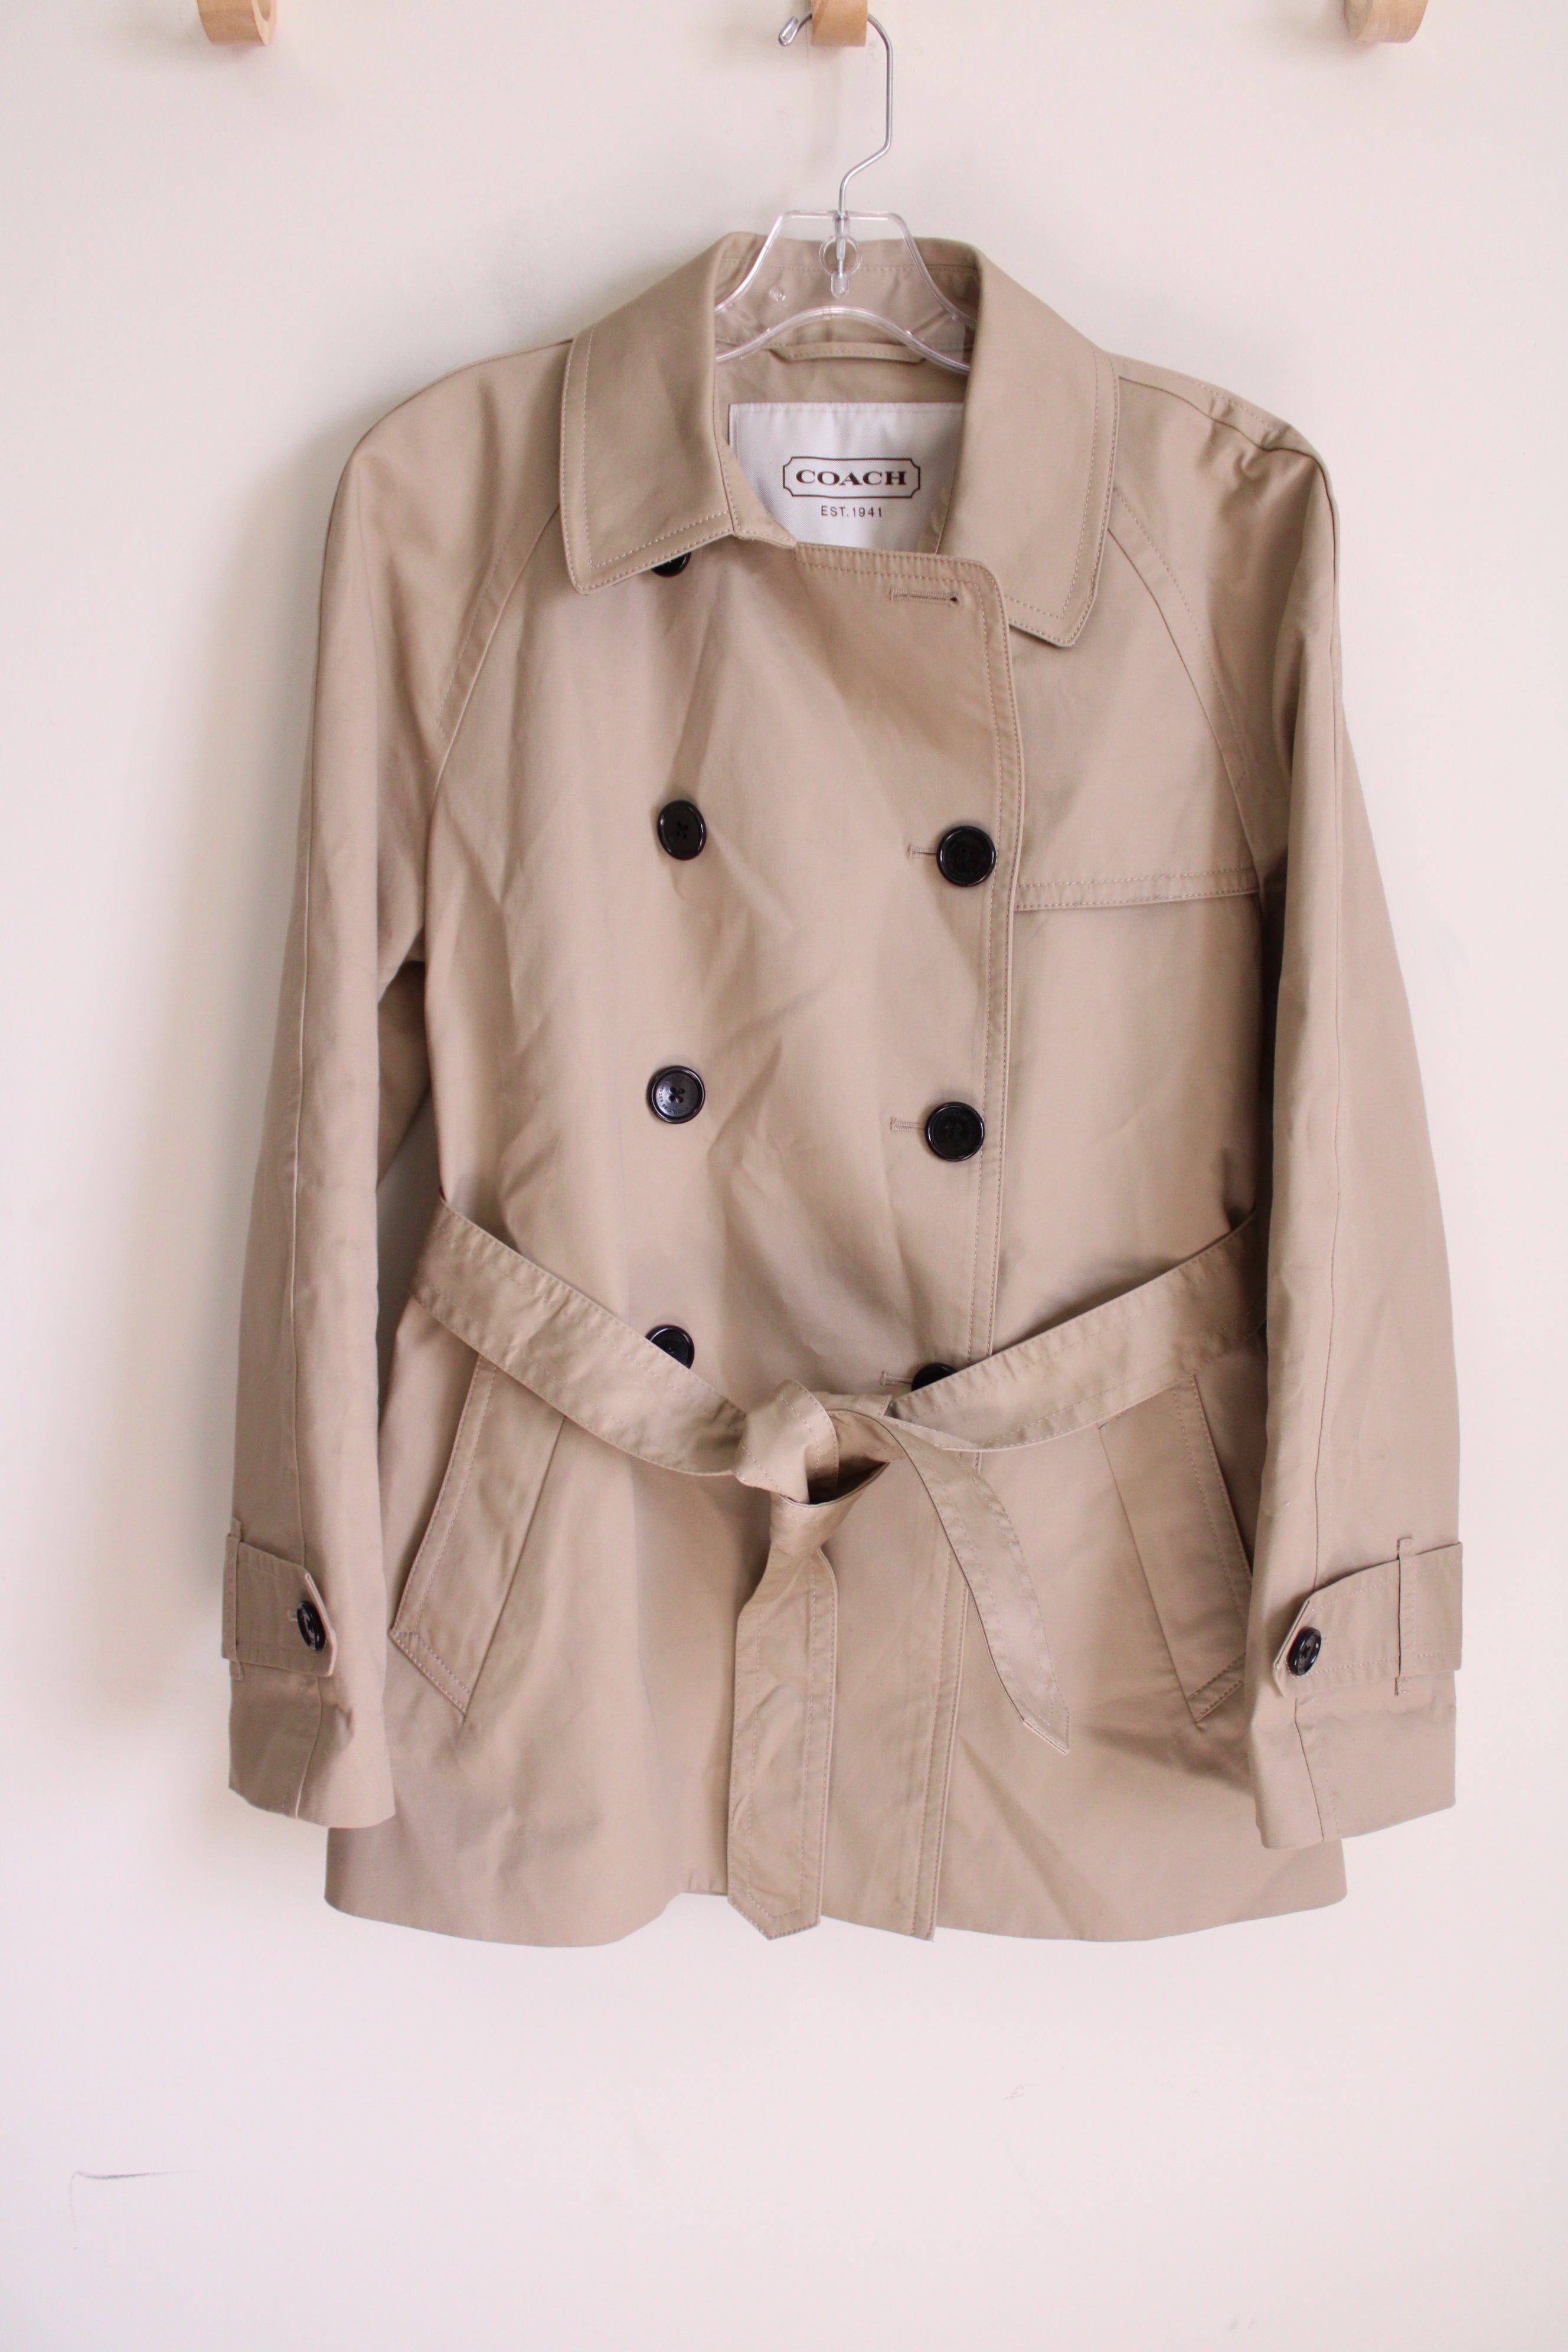 Coach Tan Trench Coat | L – Jubilee Thrift